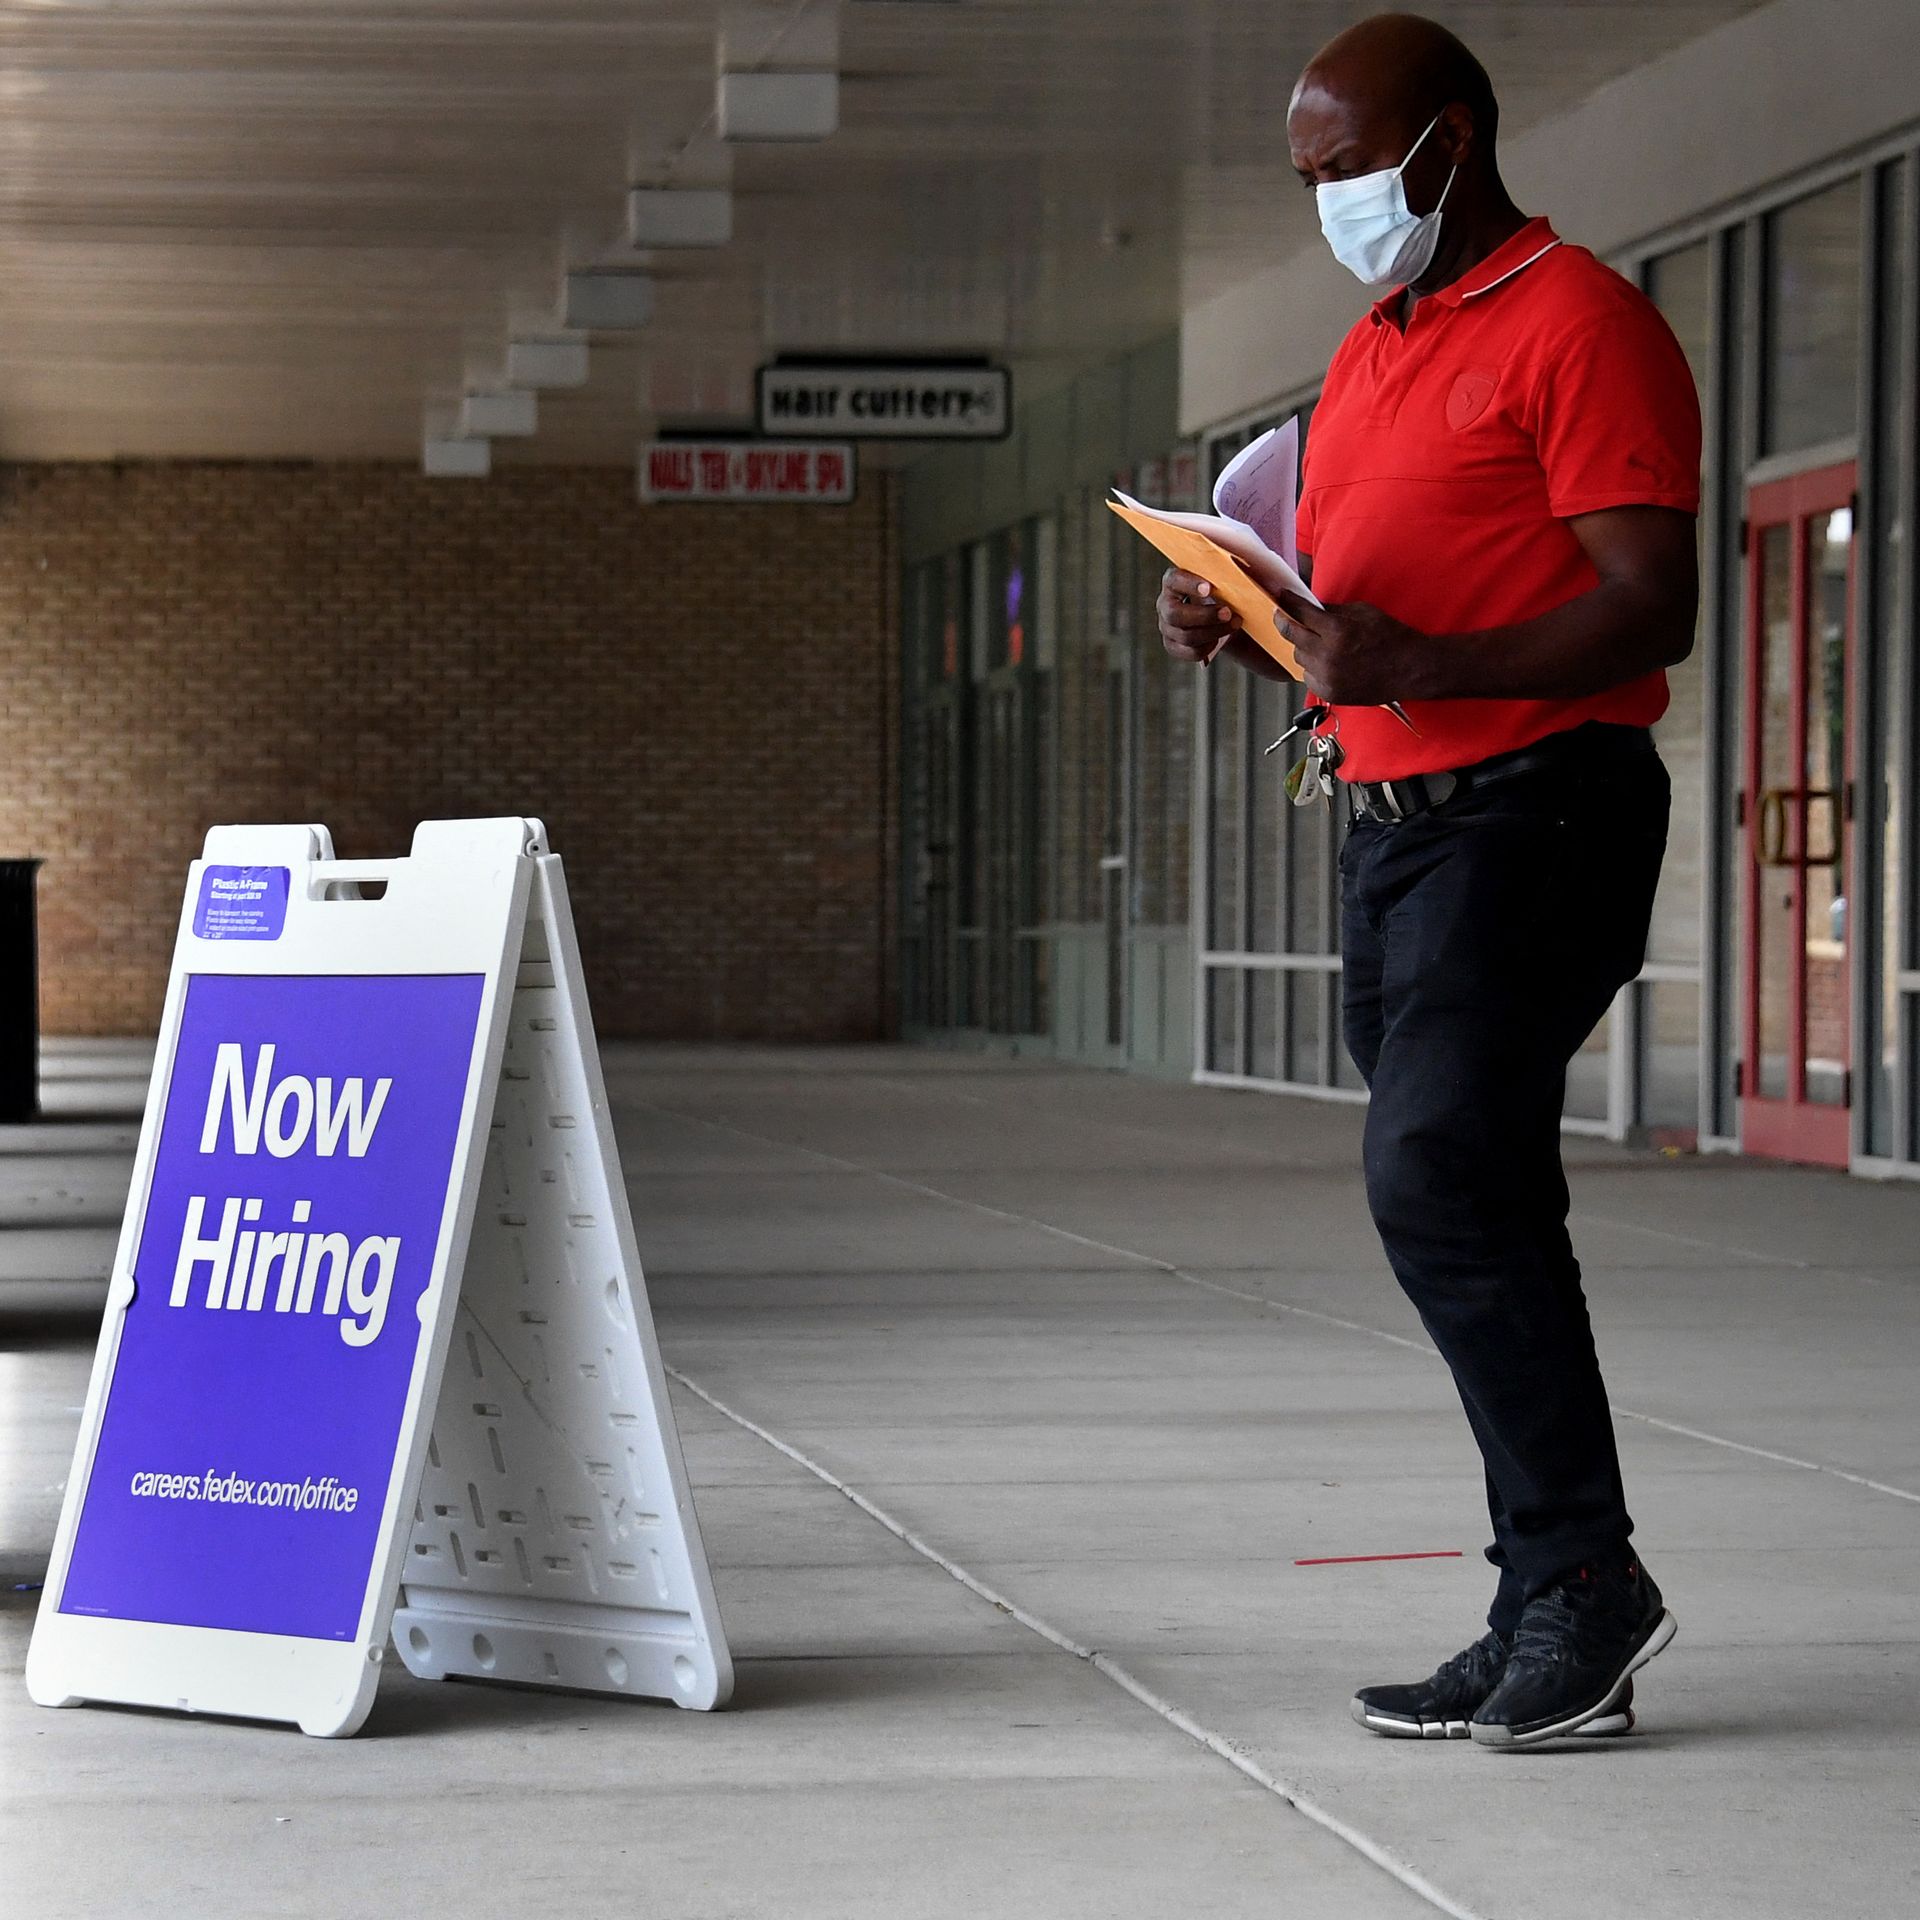 A man walks by a "Now Hiring" sign outside a store in Arlington, Va.